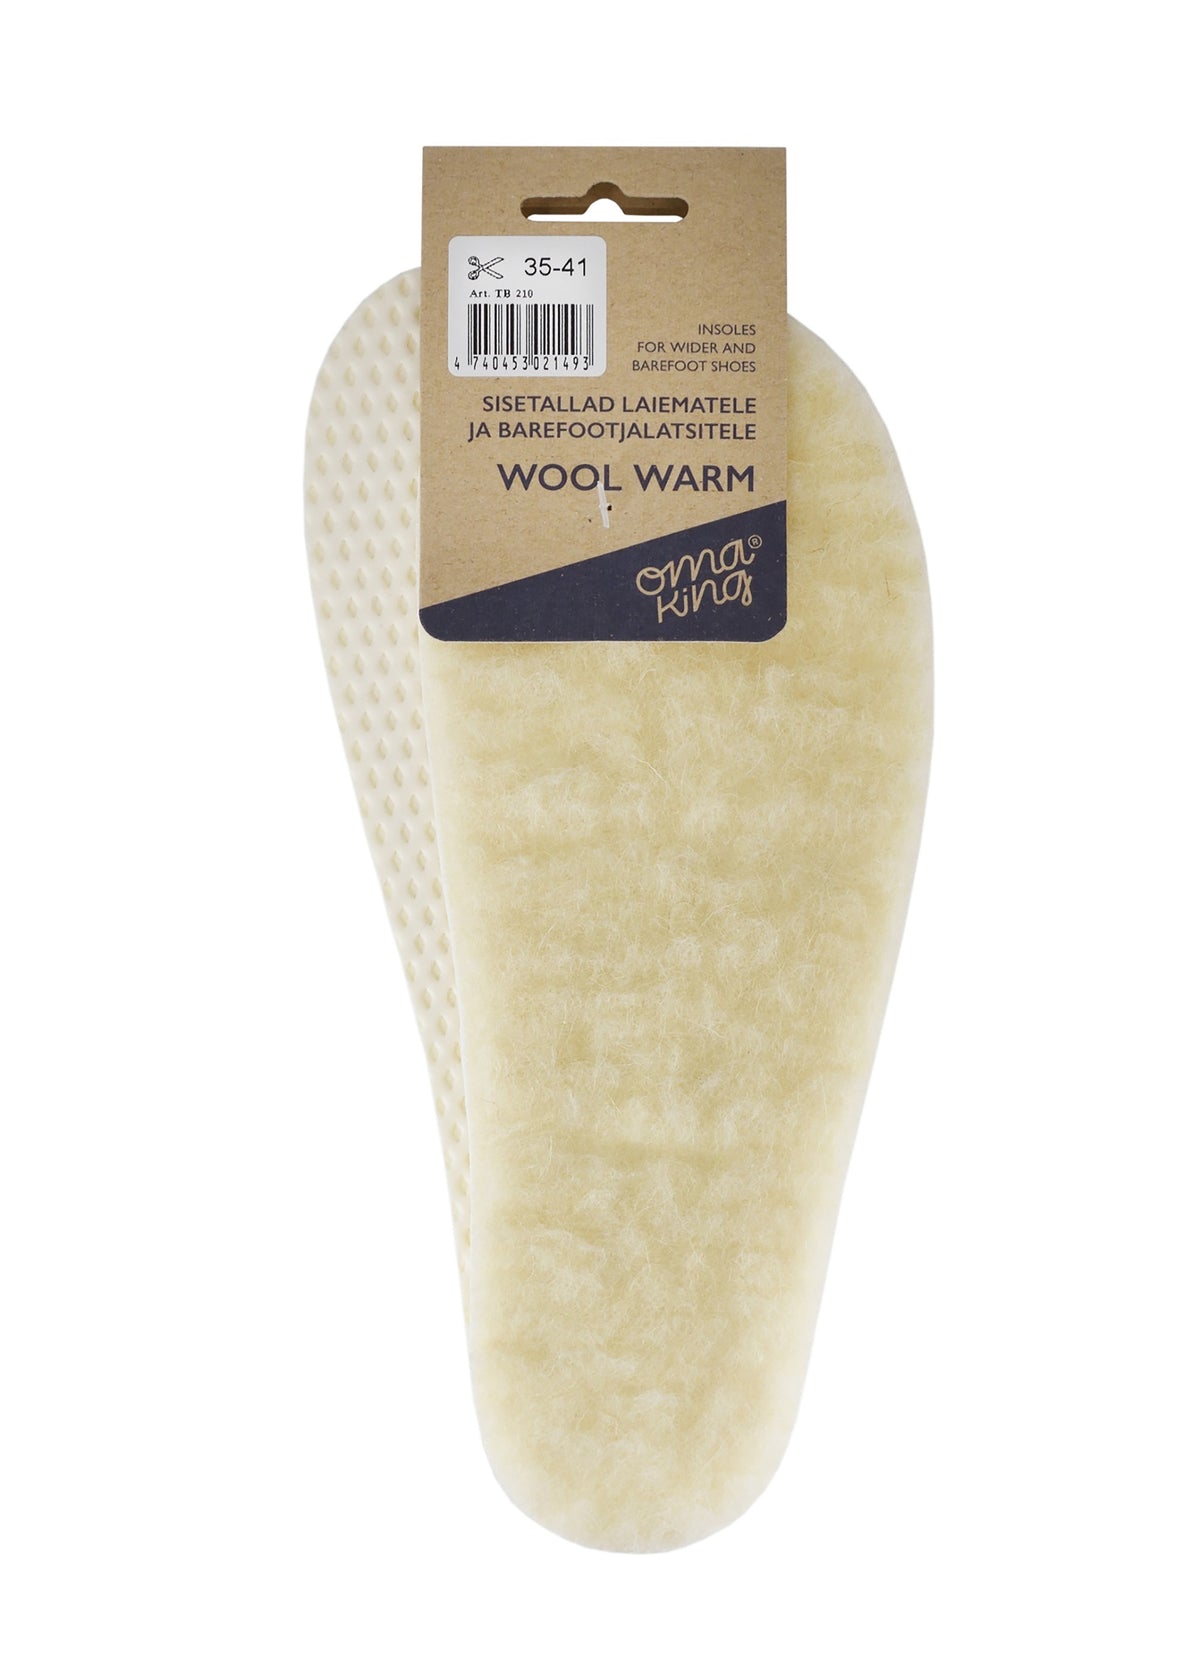 Wool Warm thermal insoles